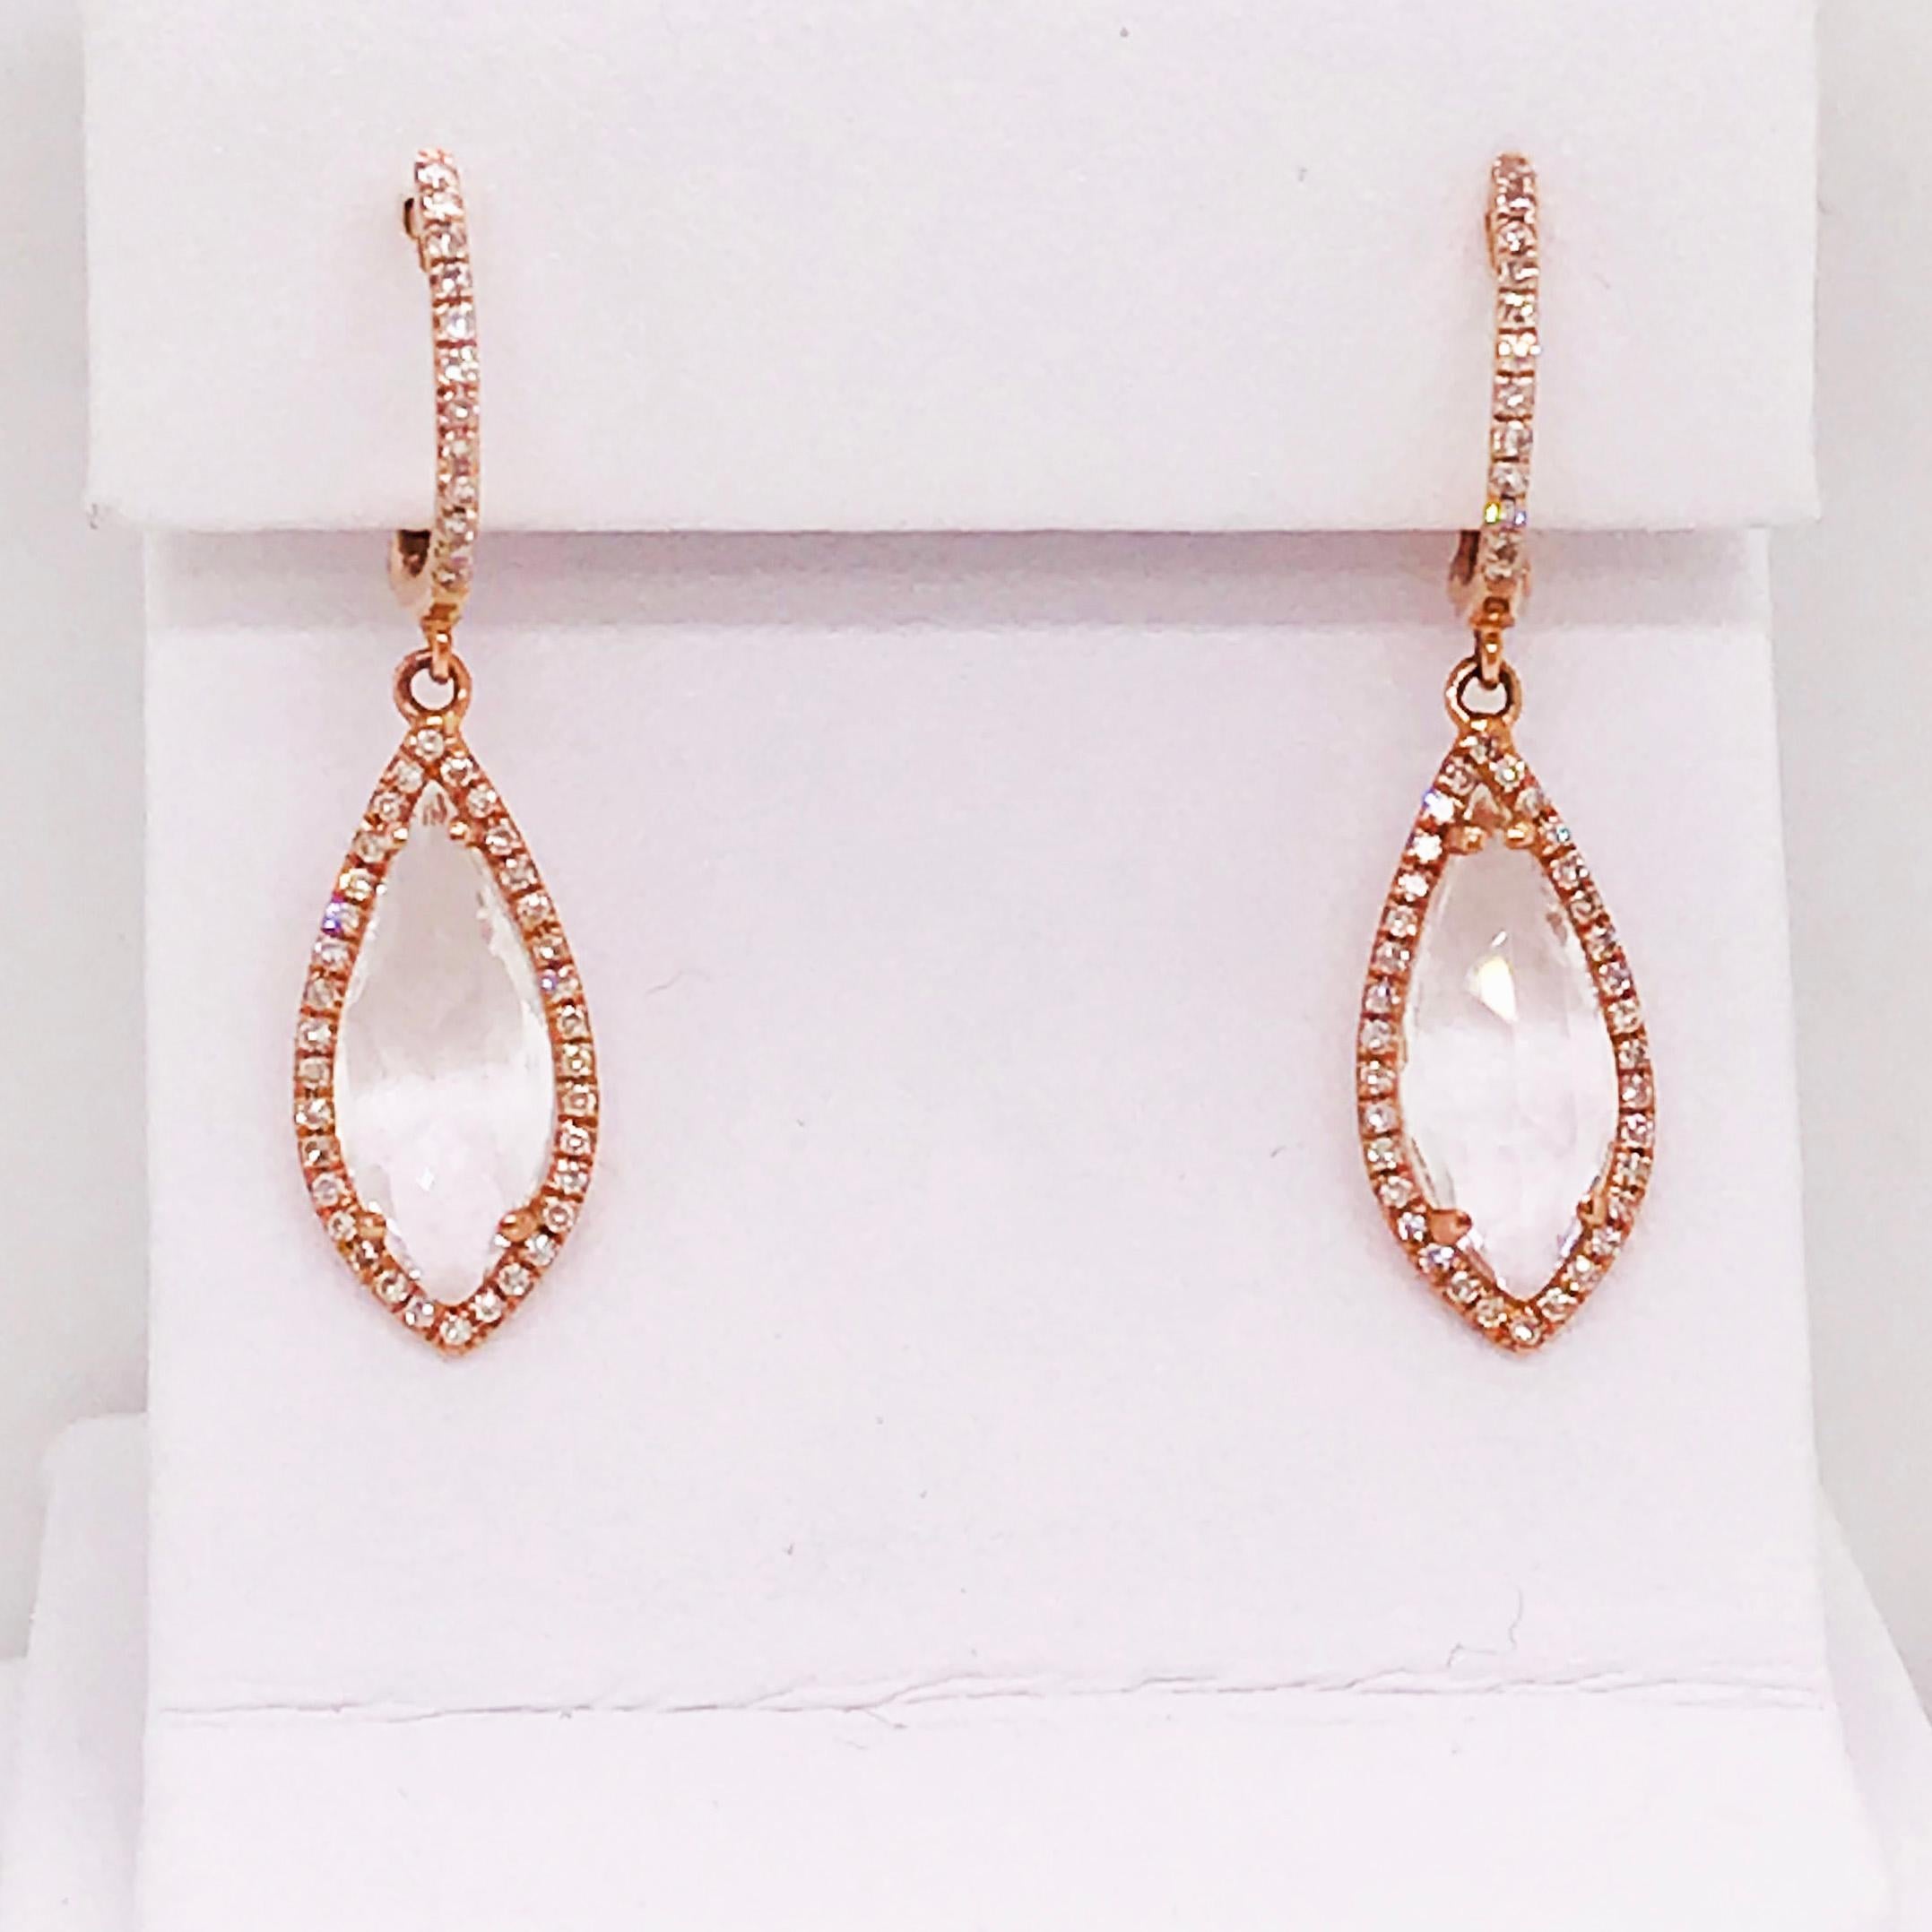 Gorgeous White Topaz and Diamond Earring Dangles in Rose Gold. With a stunning genuine white topaz gemstone with a unique cut set in each earring. Framed by a round brilliant diamond setting. The earrings have mini hoops that are paved with diamonds